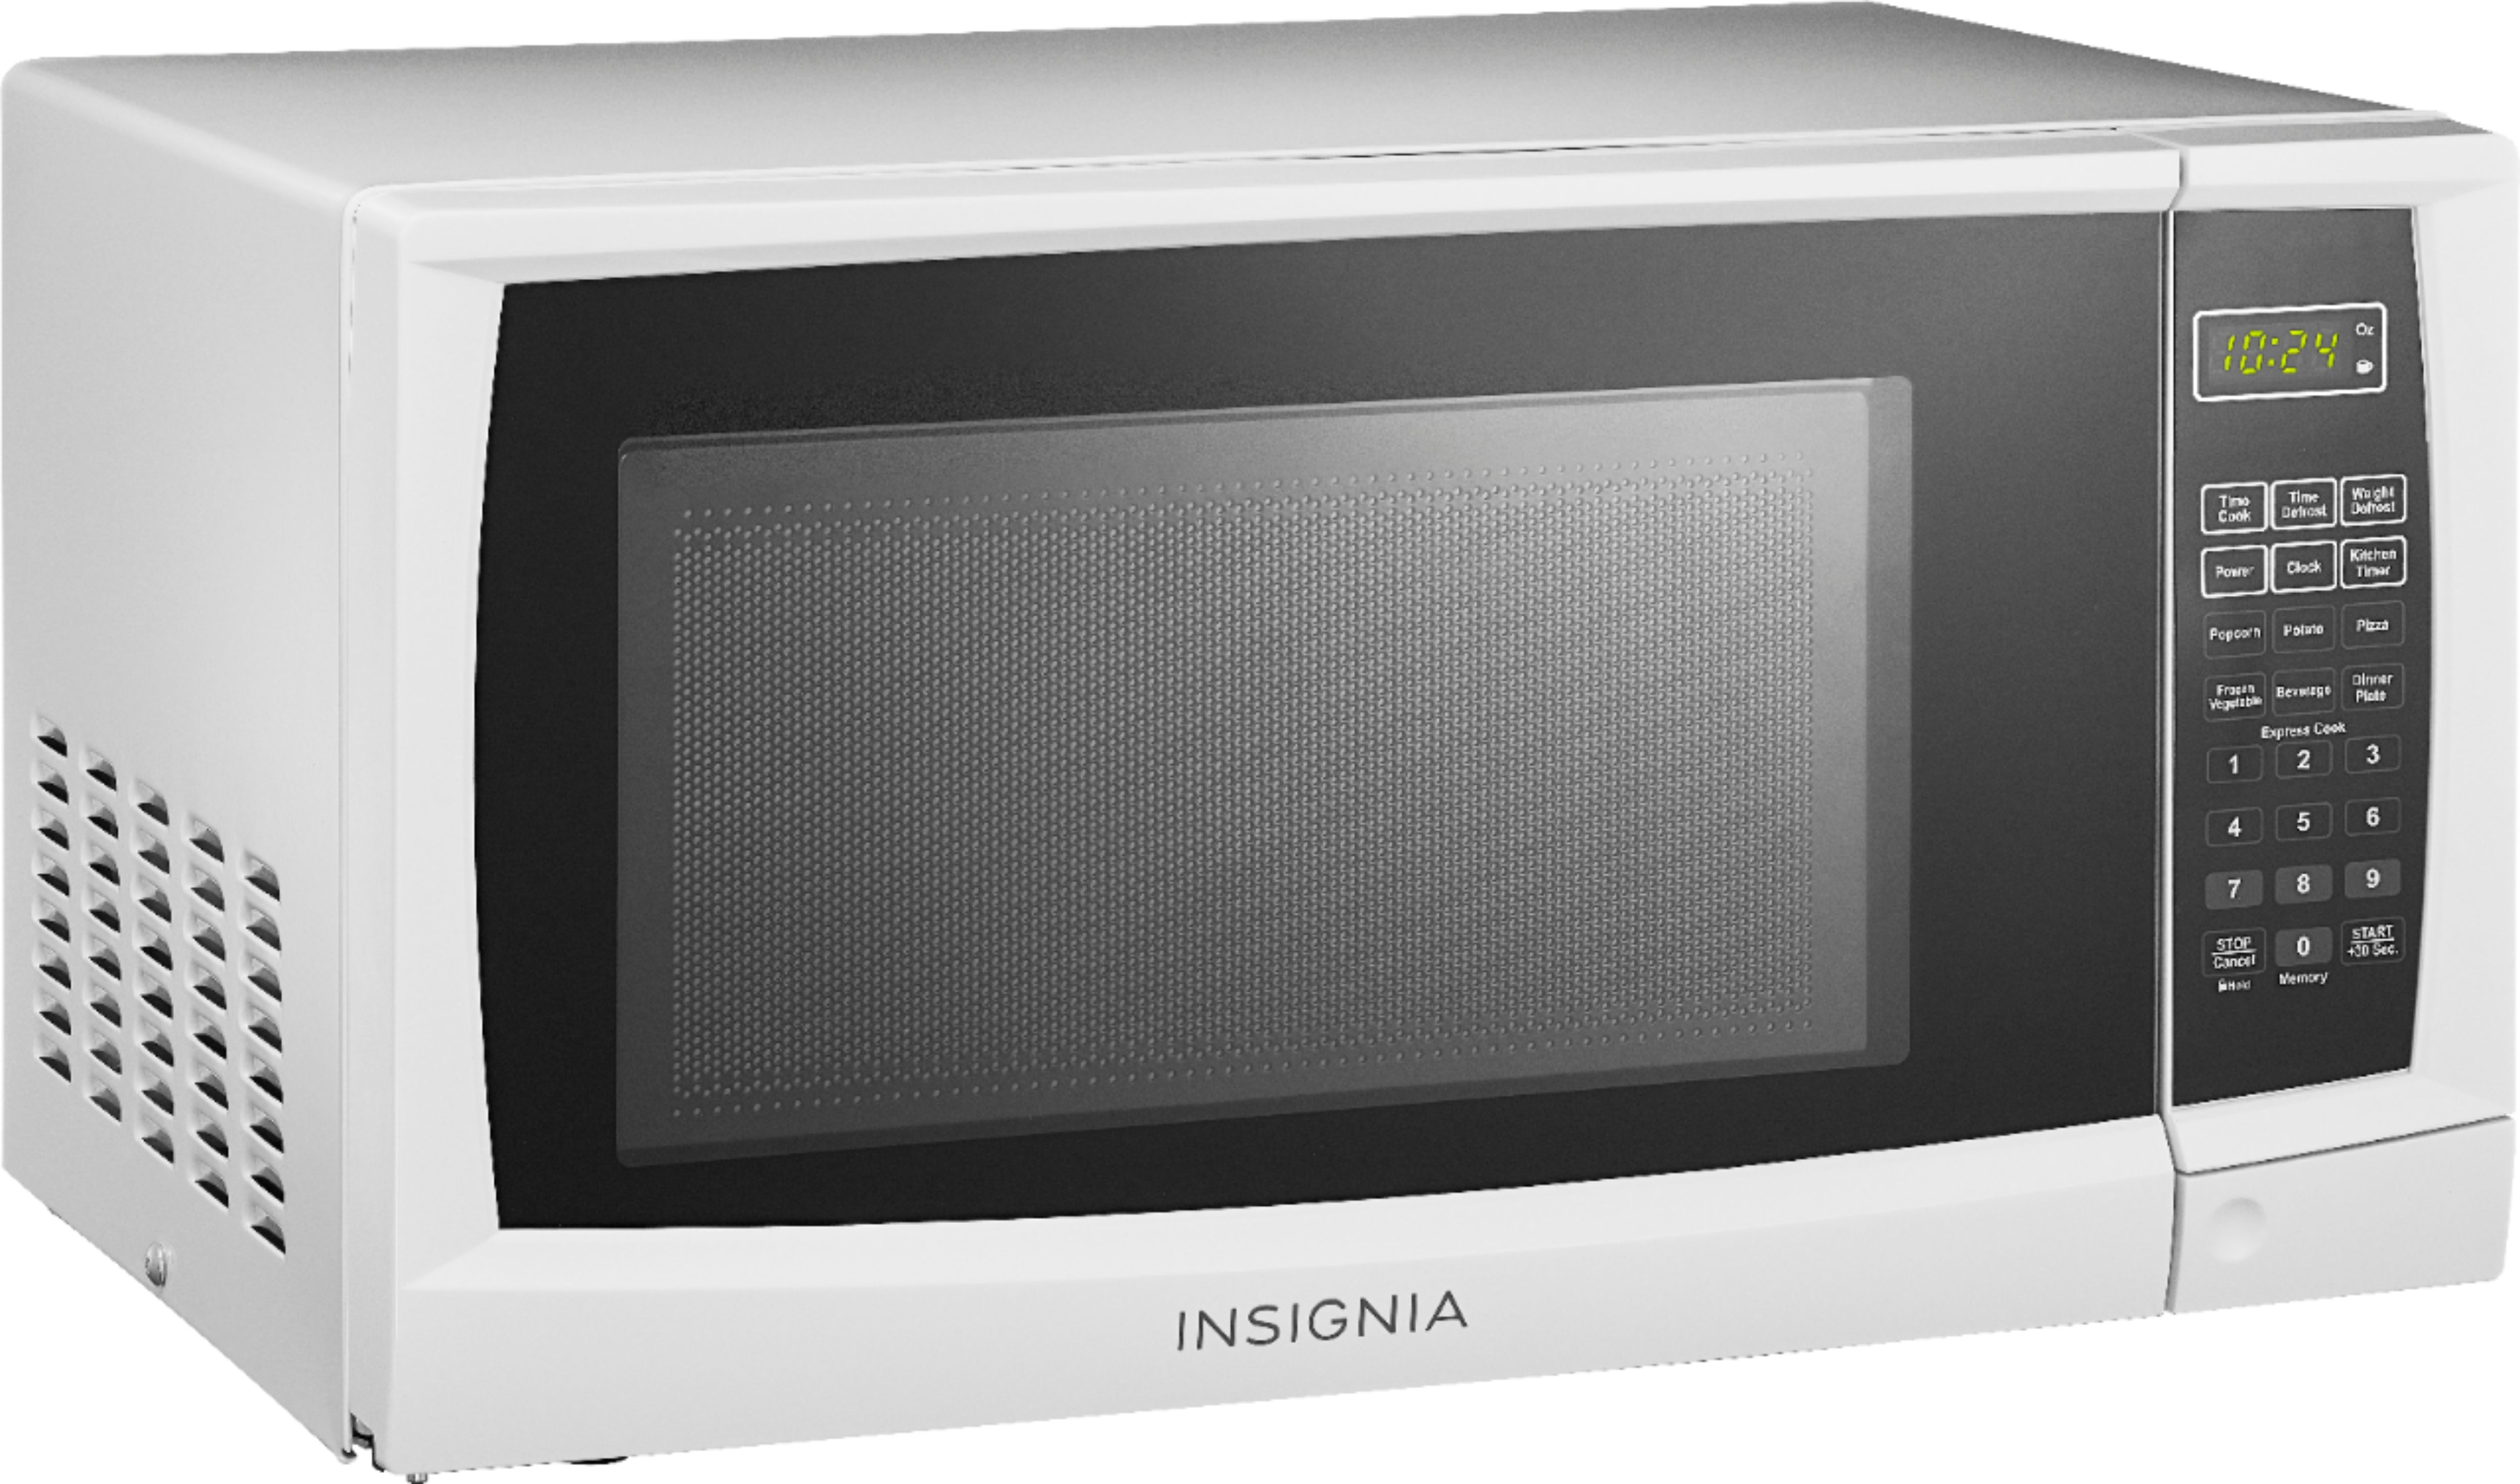 Insignia 0.7 Cu. Ft. Compact Microwave @ Best Buy $49.99